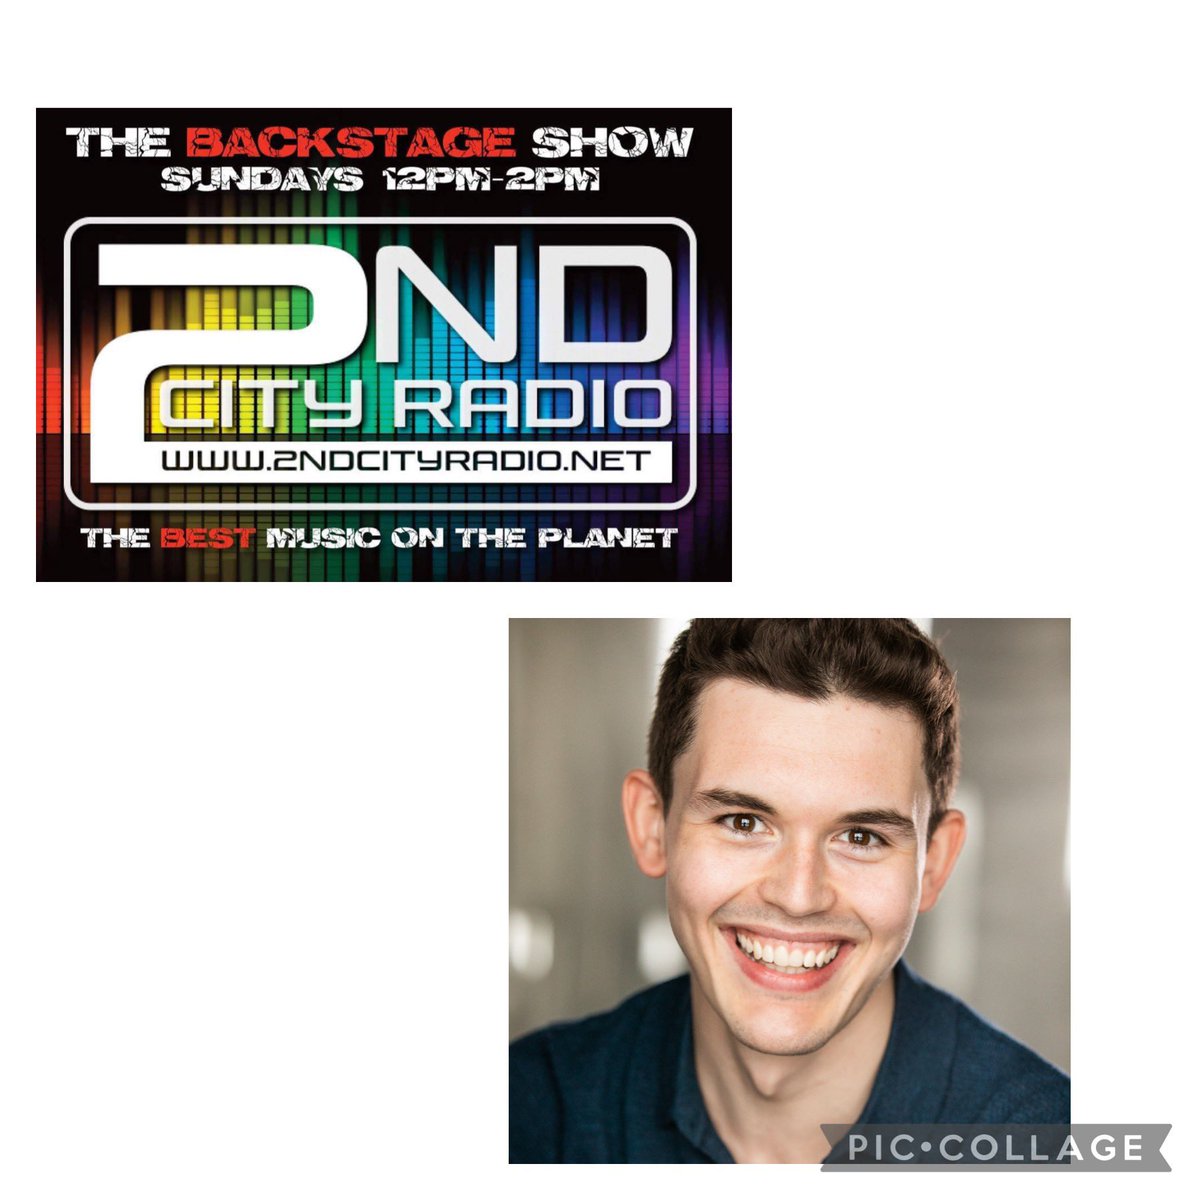 Get your sequins and glitter ready this weekend for #Backstage @SECONDCITYRADIO as we hear about @priscillaparty from Reece Kerridge who plays Adam/Felicia in the show. Tune in from midday on Sunday 2ndcityradio.net #theatre @PrBuchanan